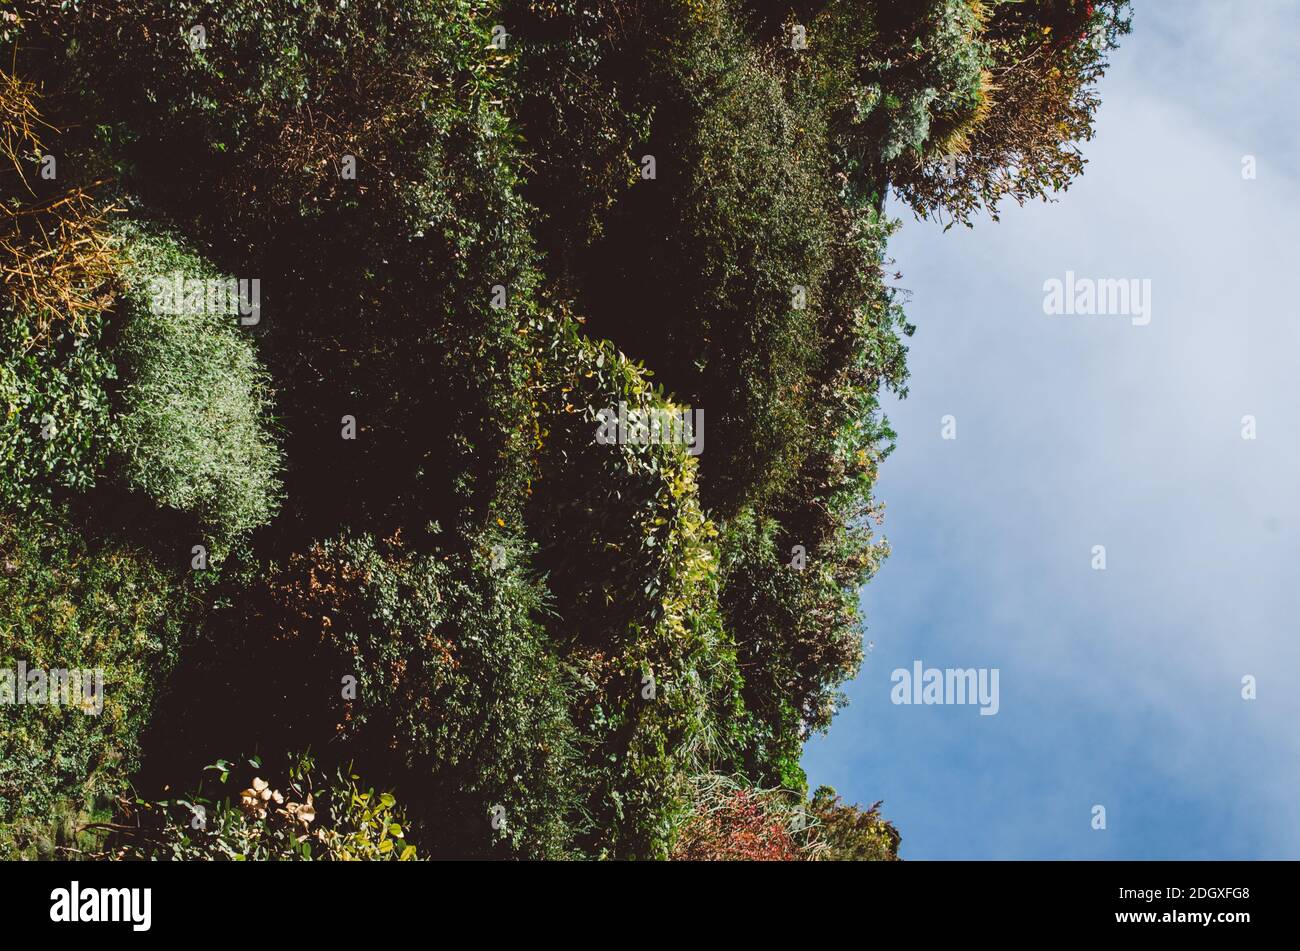 Madrid, Spain - November 29, 2020: Vertical wall garden designed by French botanist Patrick Blanc has 15,000 plants/205 species in the square in front Stock Photo